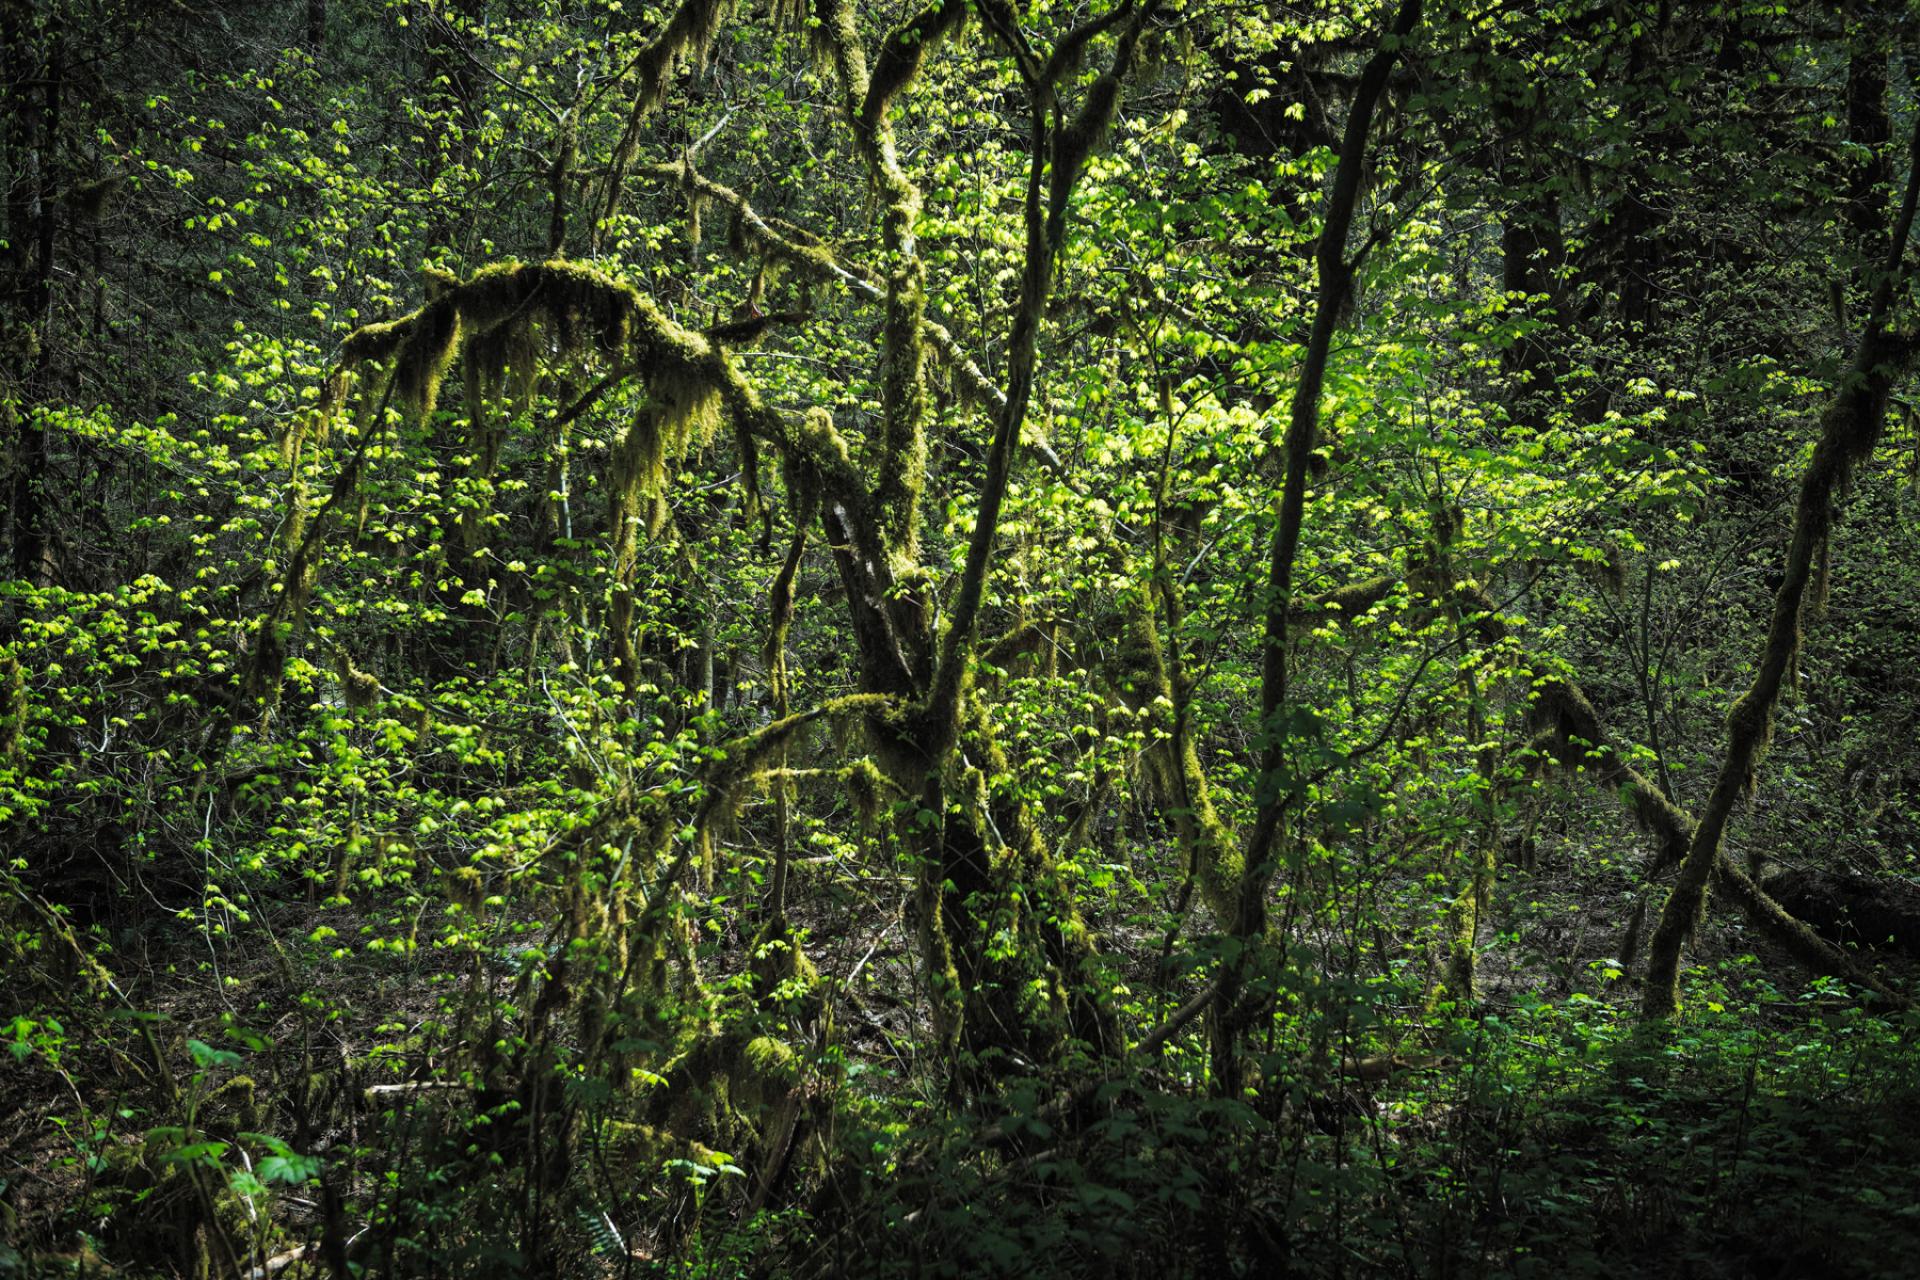 Close view of tangled green tree branches in Mt. Baker-Snoqualmie National Forest, Washington